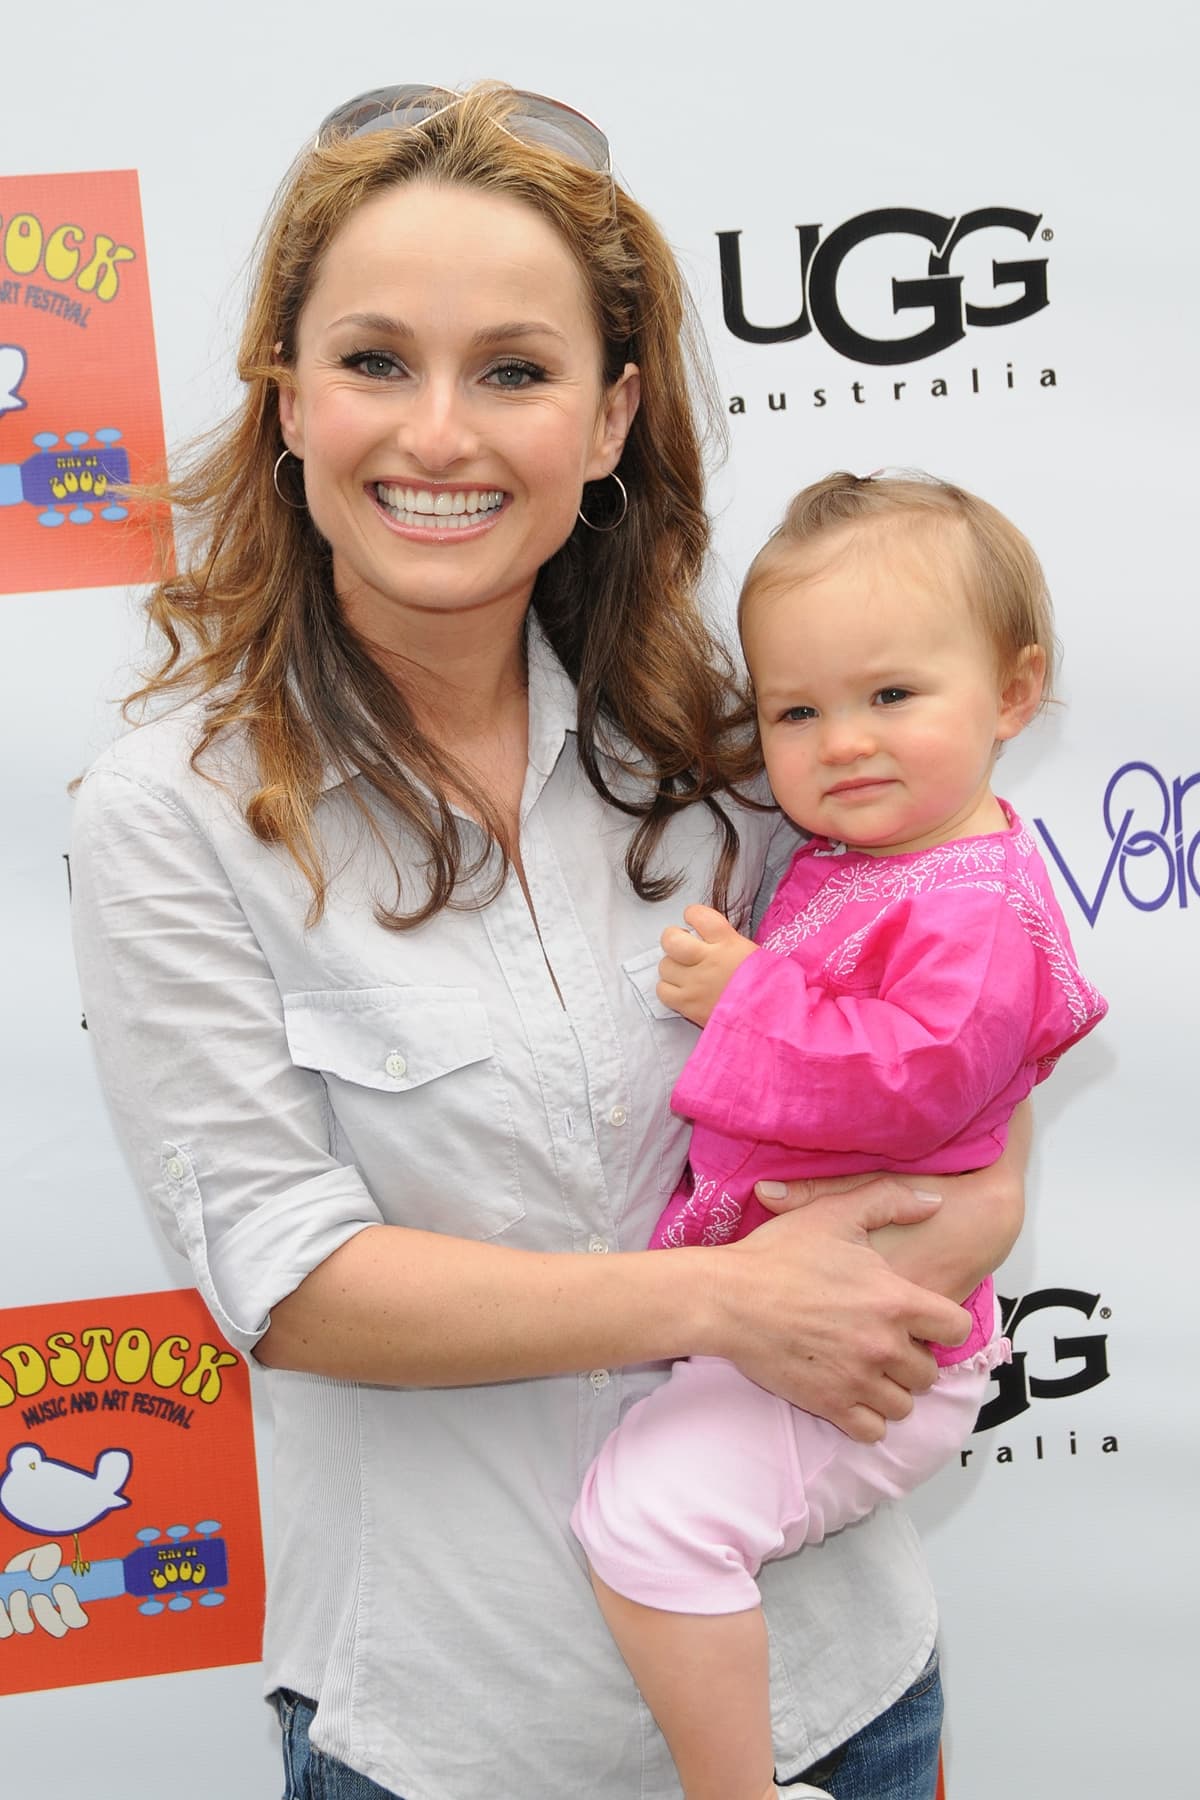 Giada De Laurentiis was 37 years old when she gave birth to her daughter Jade on March 29, 2008, in Los Angeles